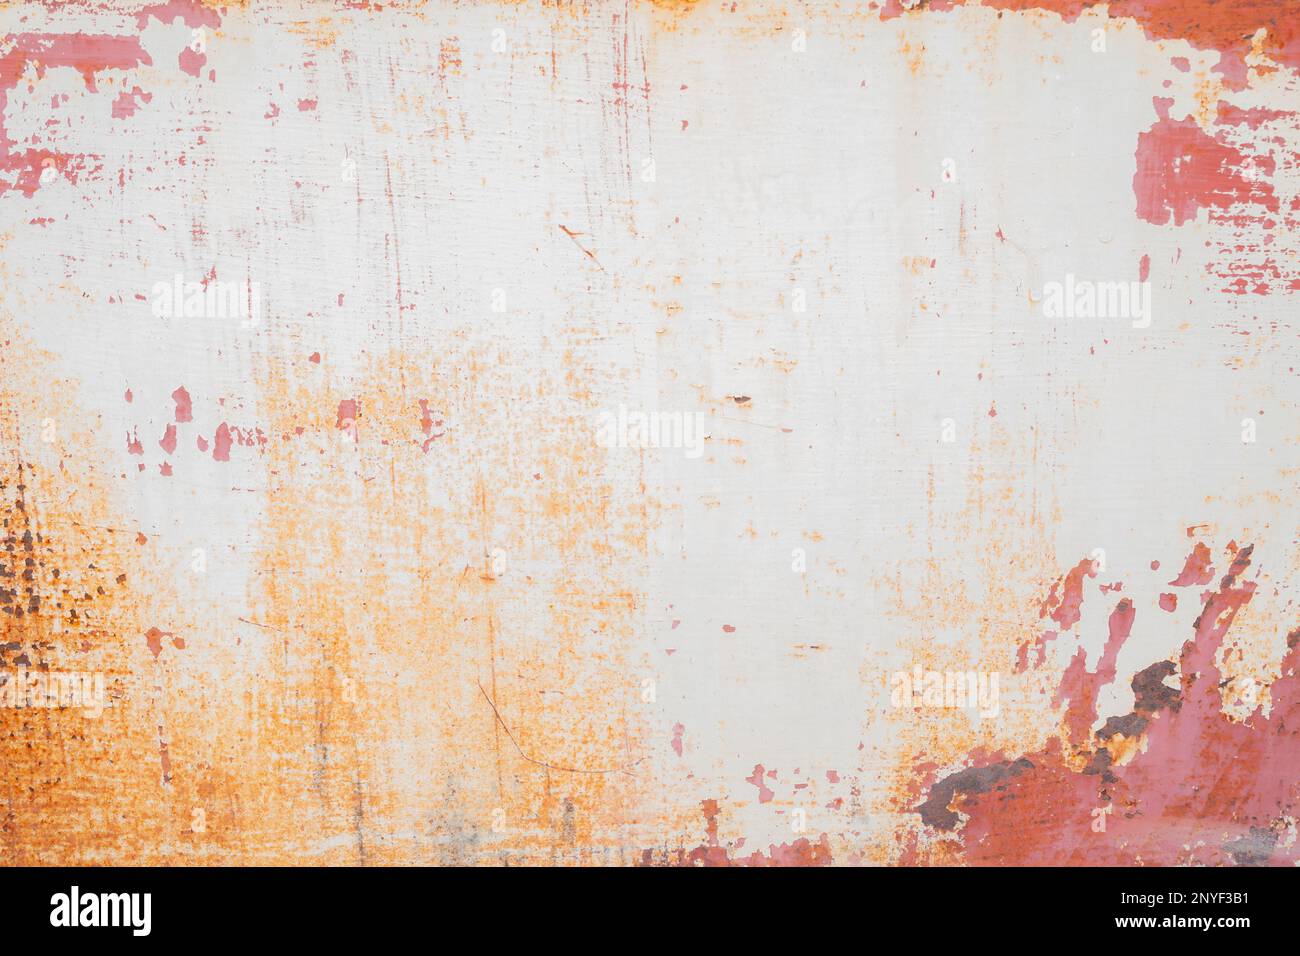 Scratched surface with paint and rust stains texture. Stock Photo